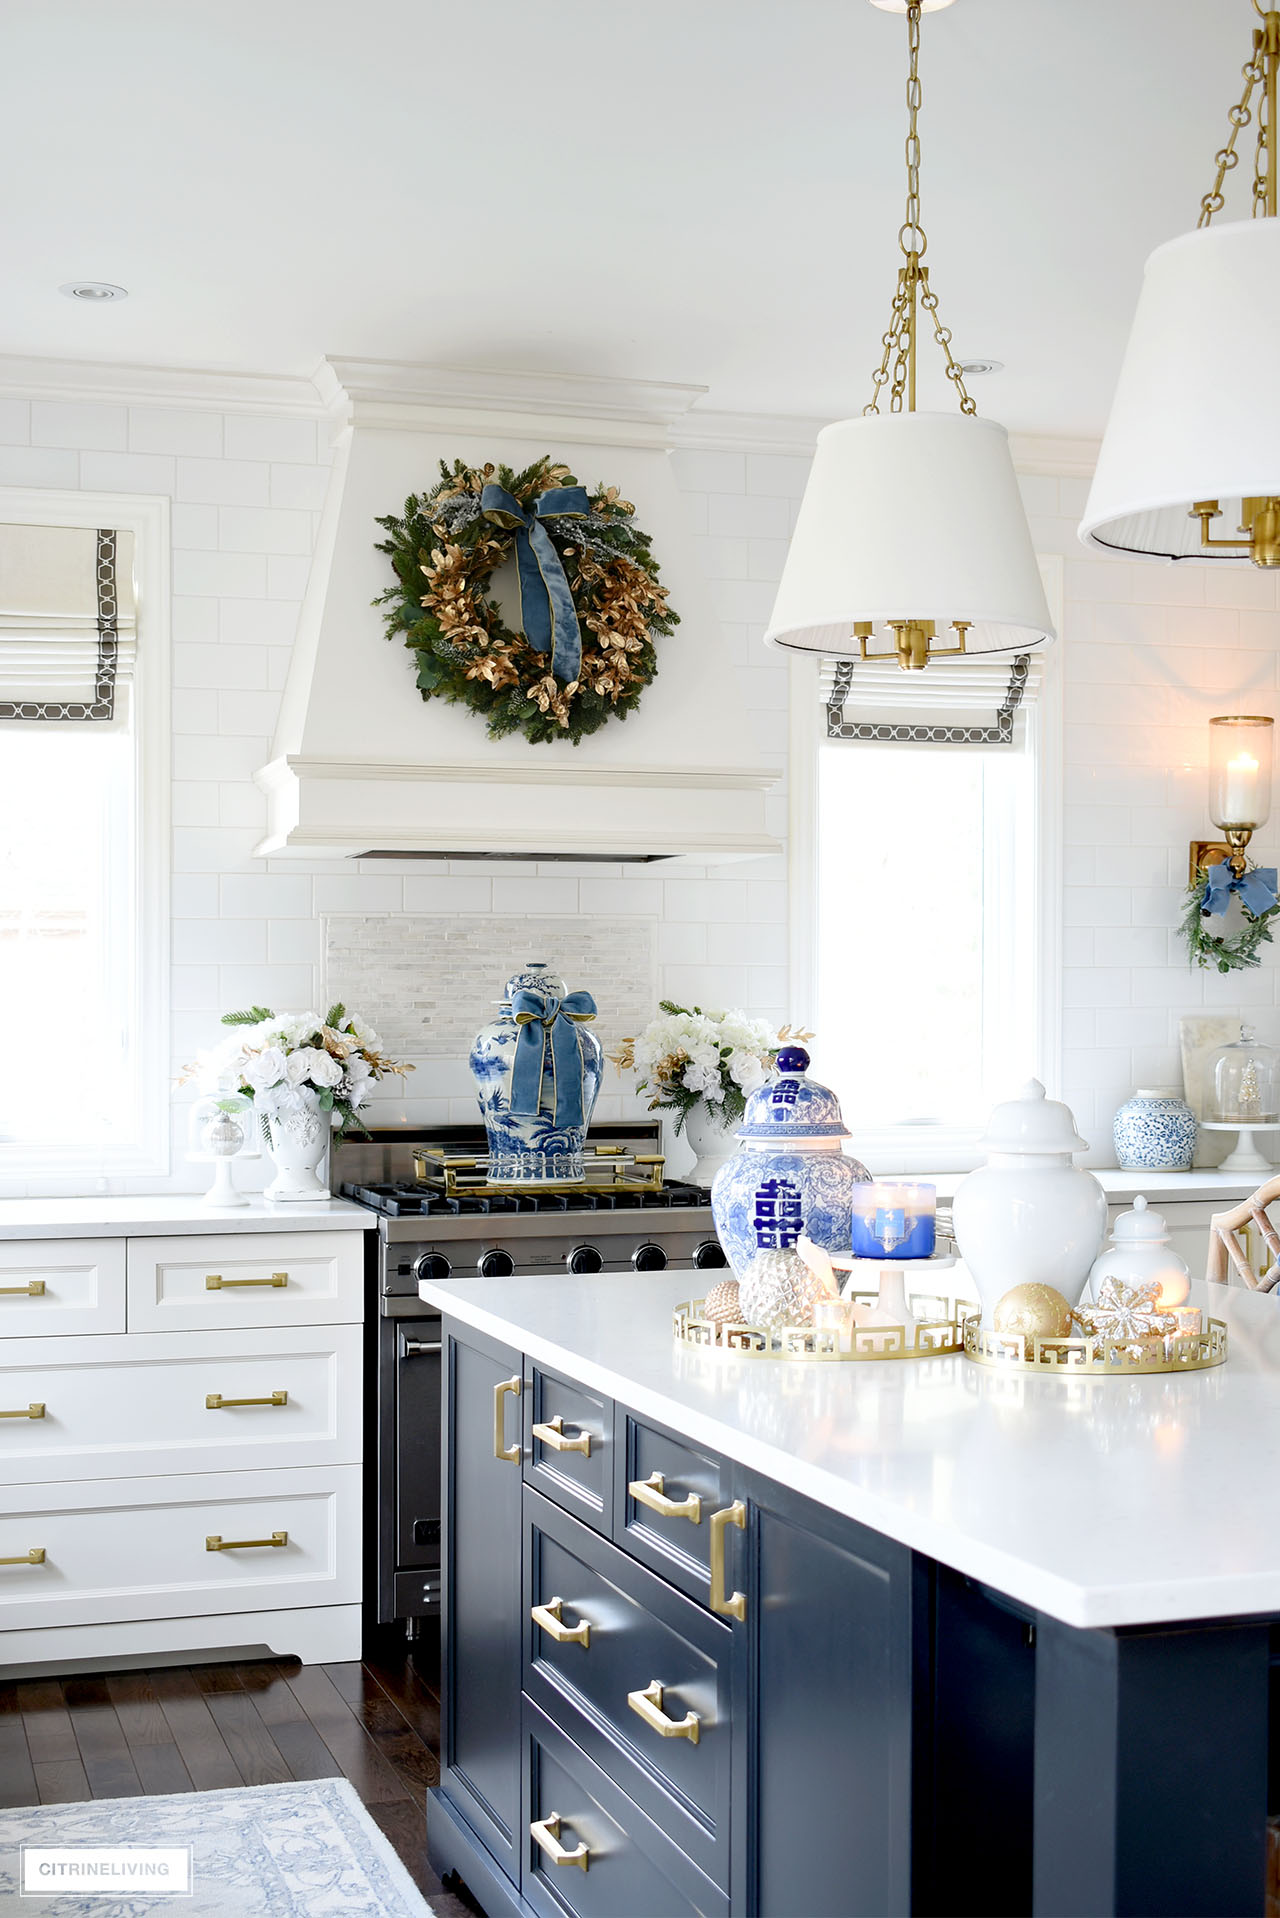 Kitchen island styled for Christmas with ginger jars, candles, ornaments and trays. A large ginger jar on the stove with a blue velvet ribbon is an elegant detail along with a green and gold wreath hung above on the hood.